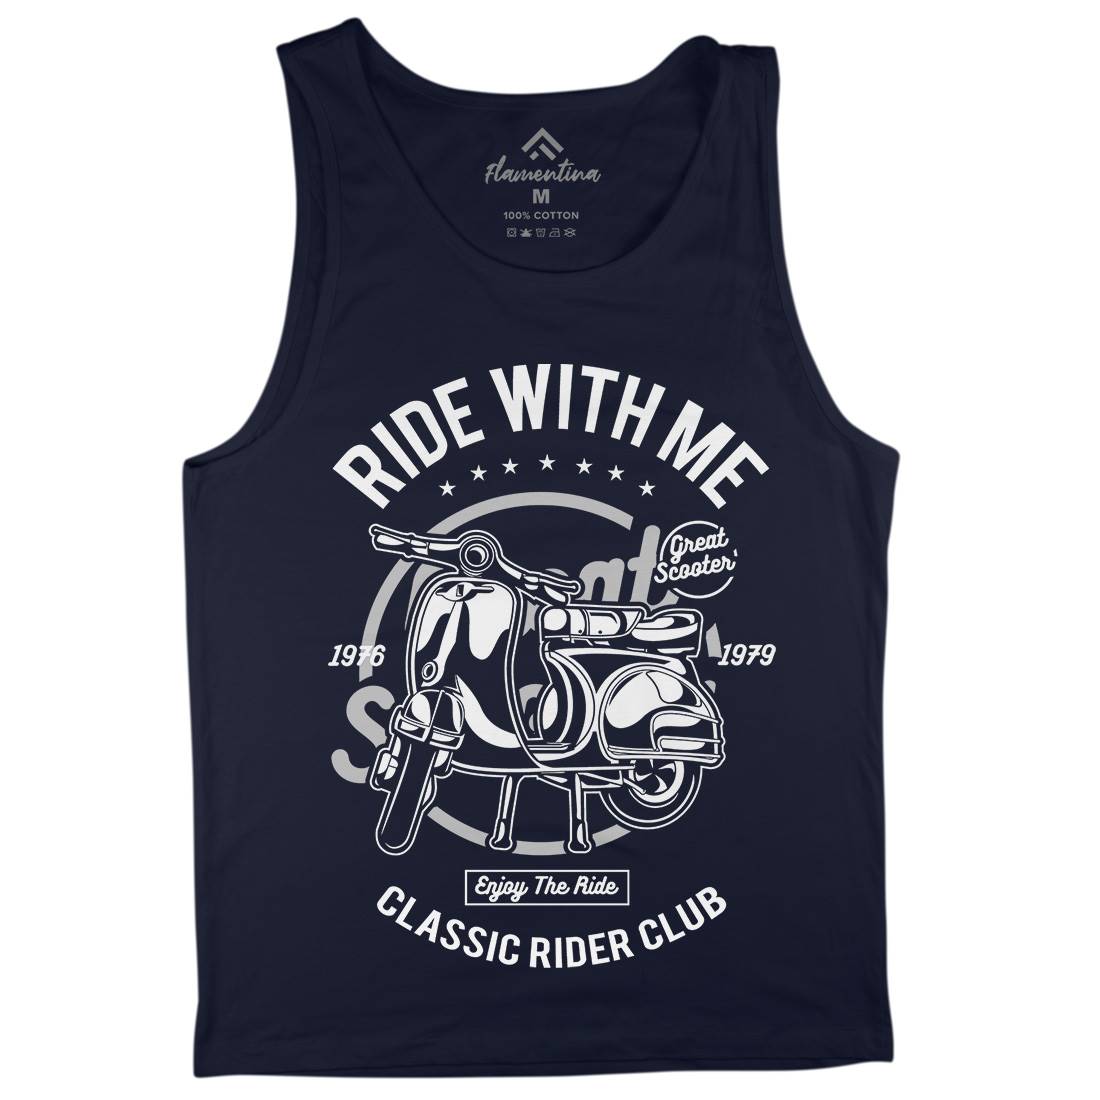 Ride With Me Mens Tank Top Vest Motorcycles A120